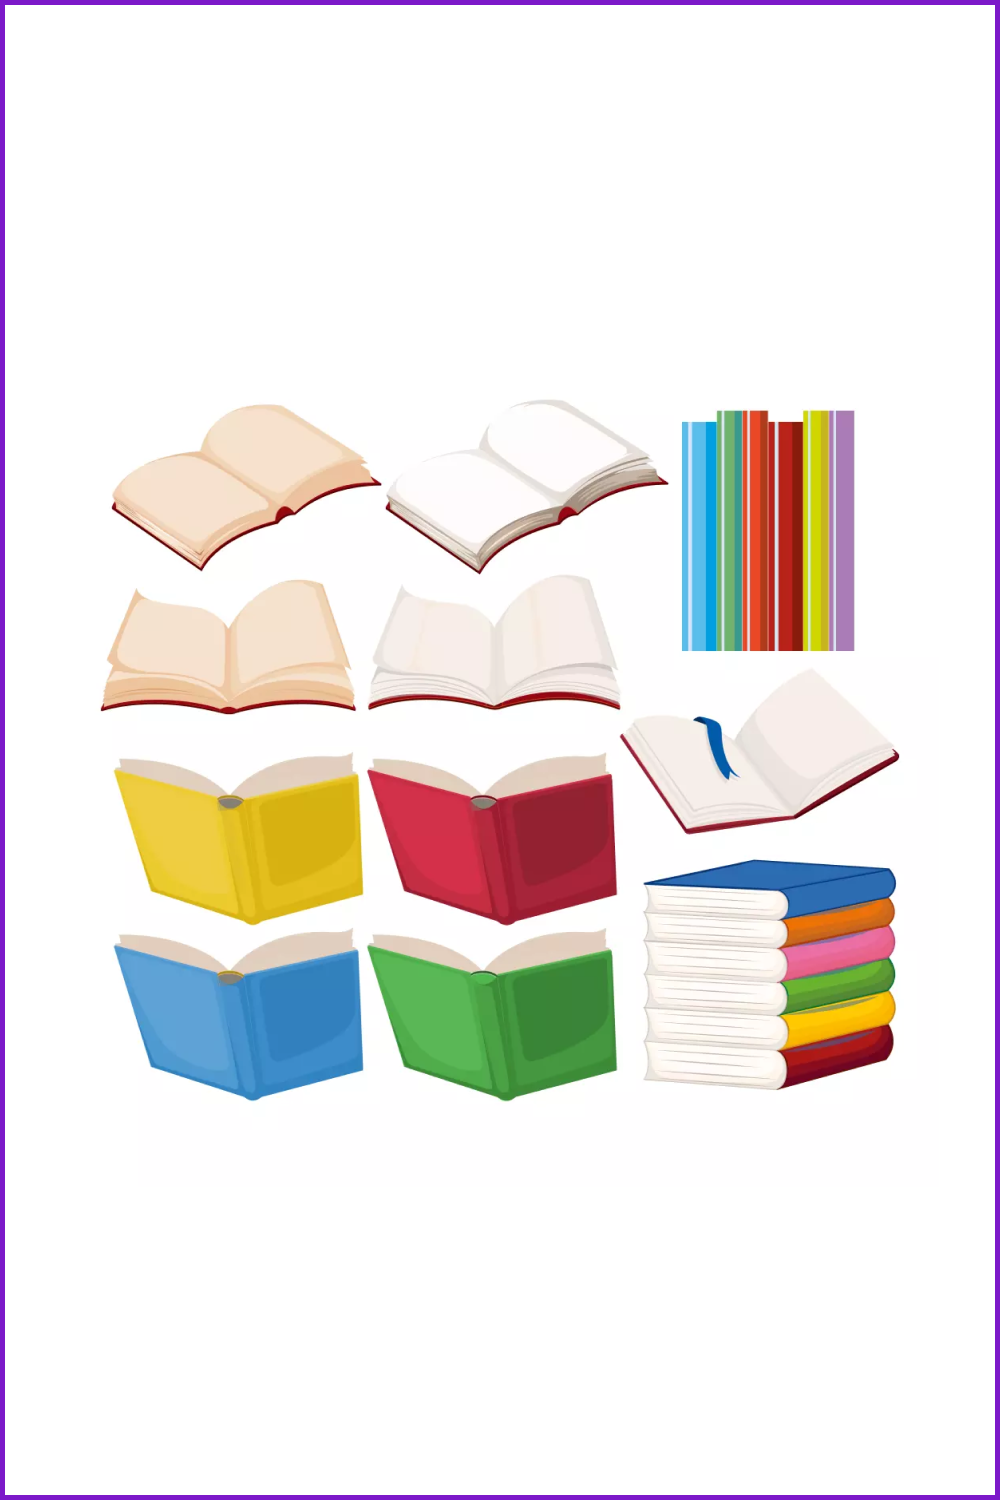 Collage of drawn books with colorful covers in stacks and on the table.